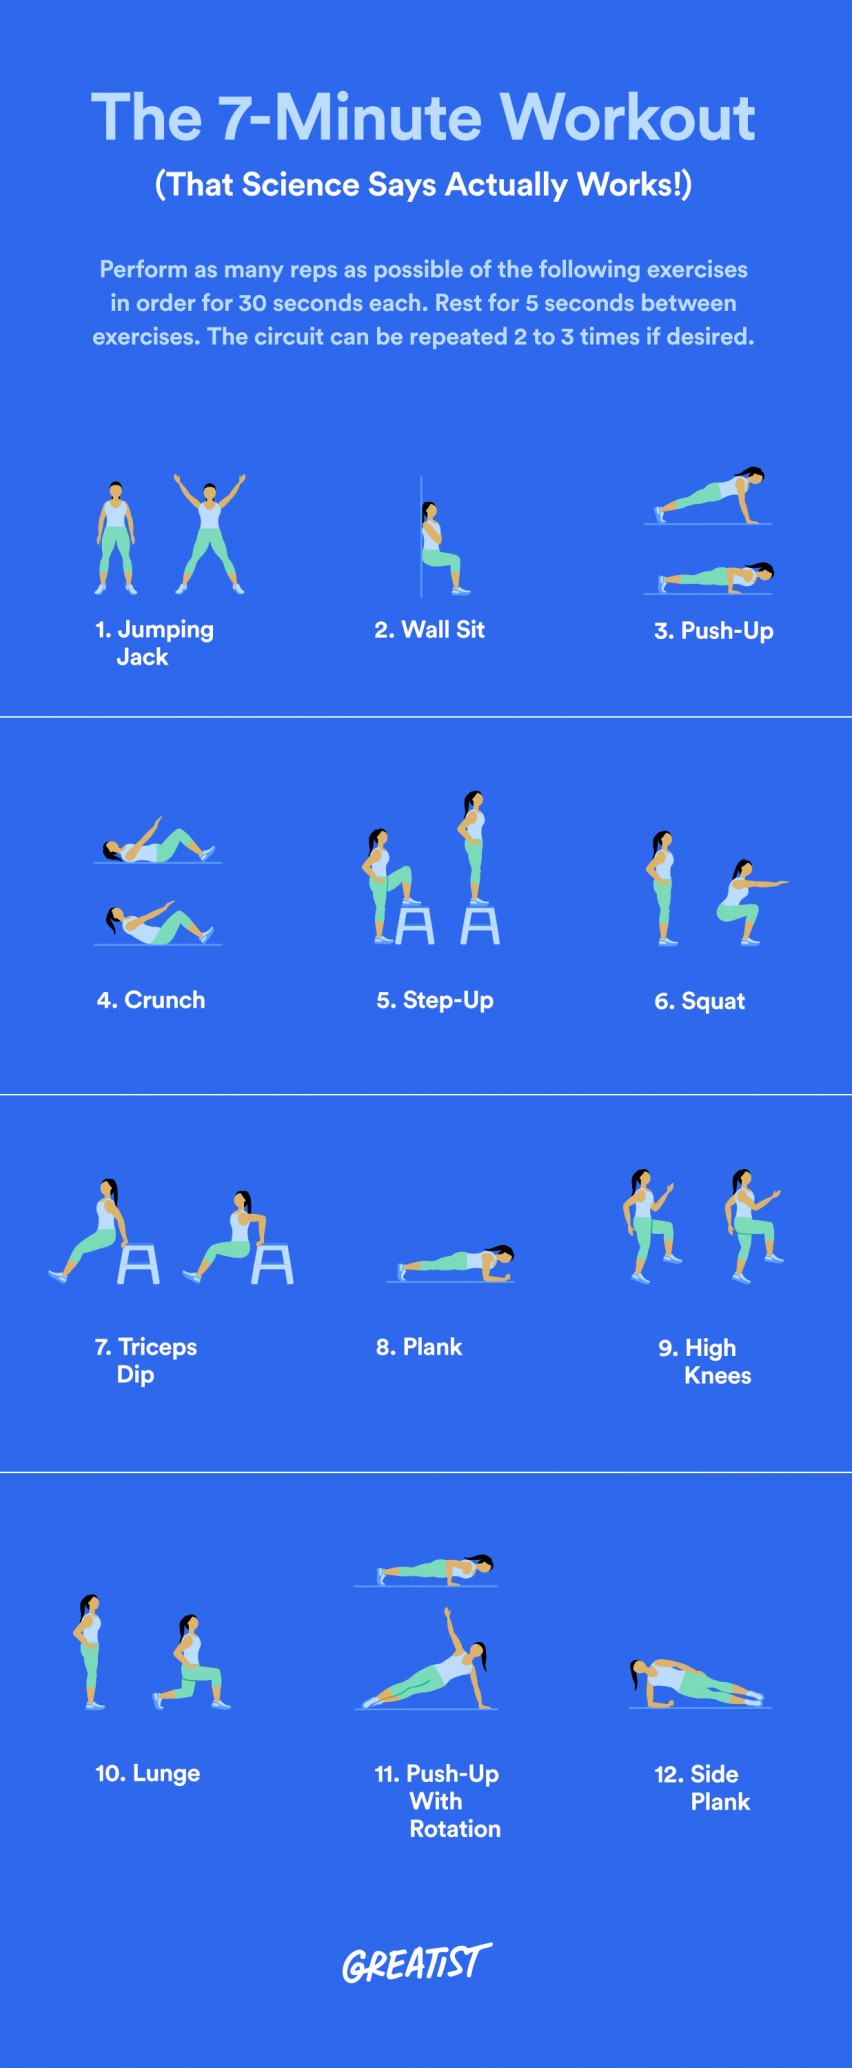 An infographic for "The 7-Minute Workout (That Science Says Actually Works!)" which explains that you should "Perform as many reps as possible of the following exercises in order for 30 seconds each. Rest for 5 seconds between exercises. The circuit can be repeated 2 to 3 times if desired." with illustrations of 12 different exercises below, including Jumping Jack, Wall Sit, Push-up, Crunch, Step-Up, Squat, Triceps Dip, Plank, High Knees, Lunge, Push-up with rotation and Side Plank.